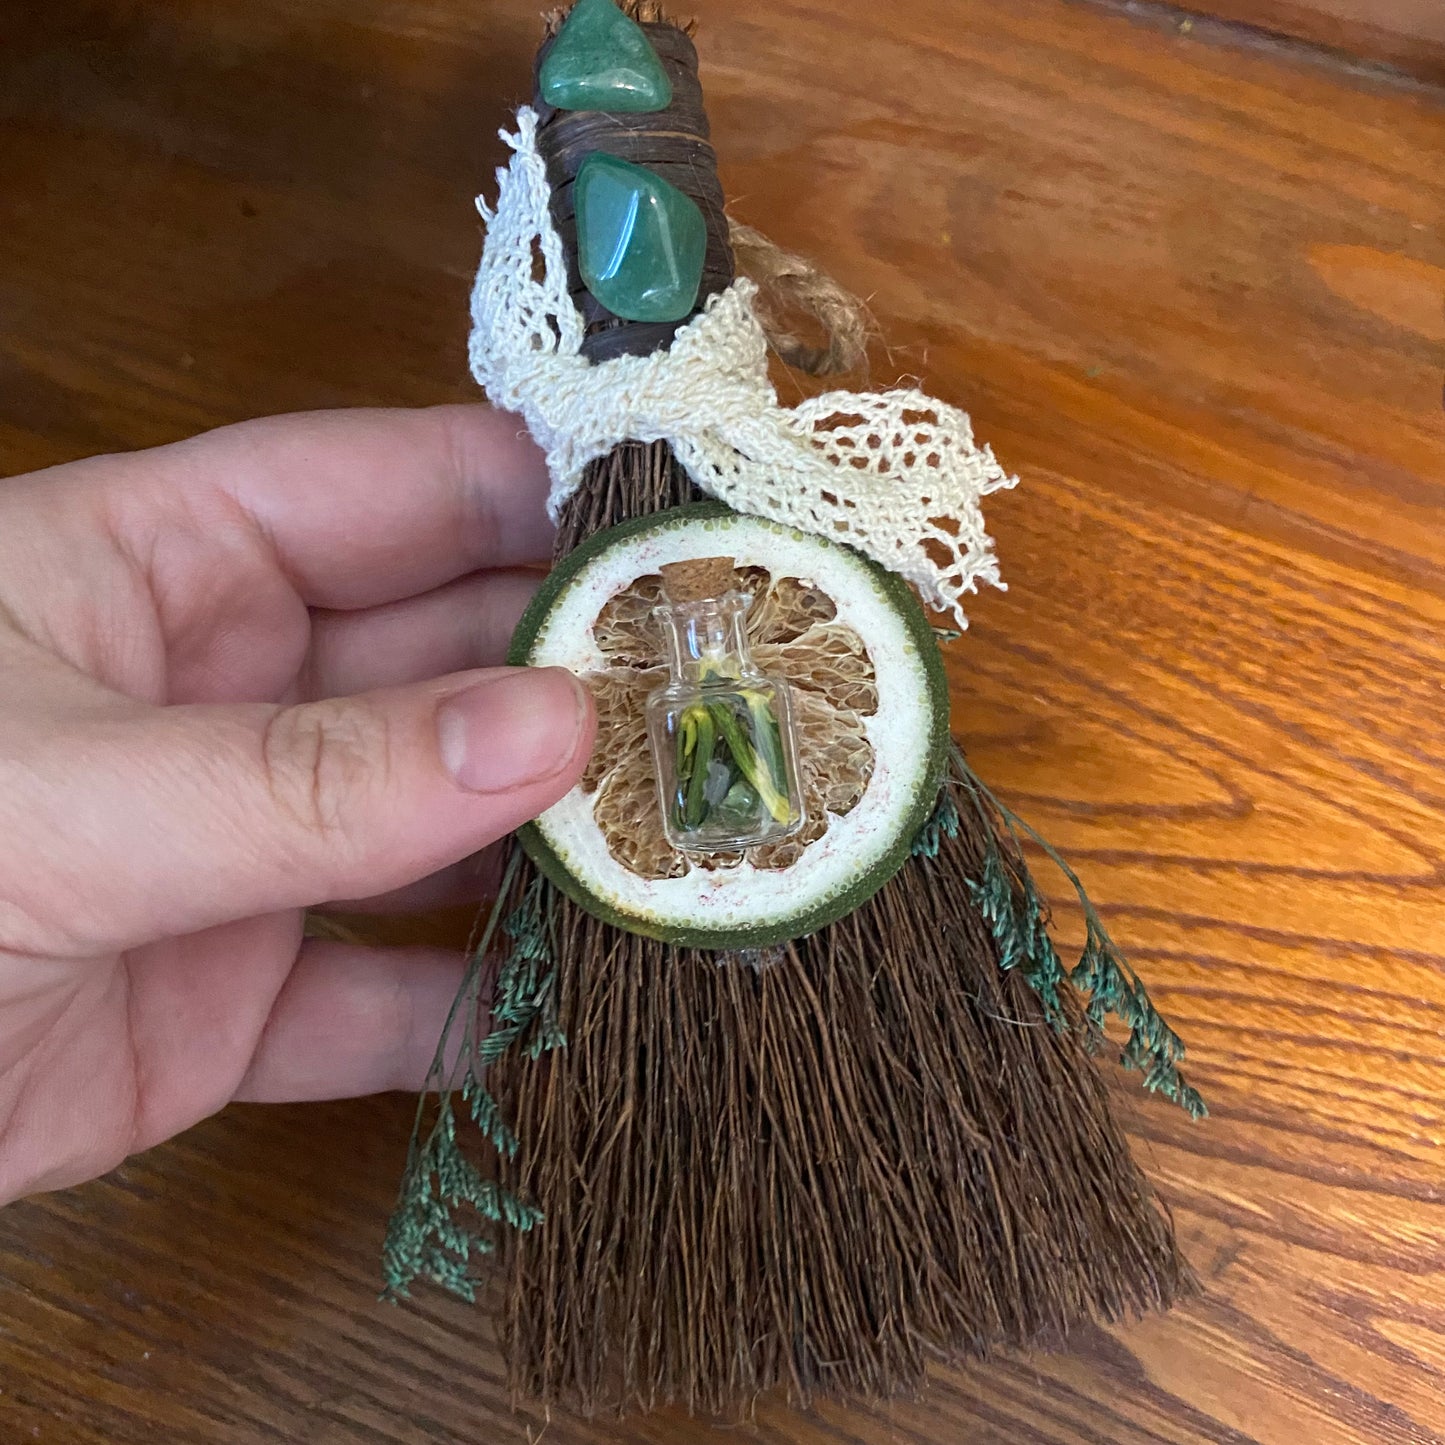 Scented spring blessing broom besom- prosperity and cleansing